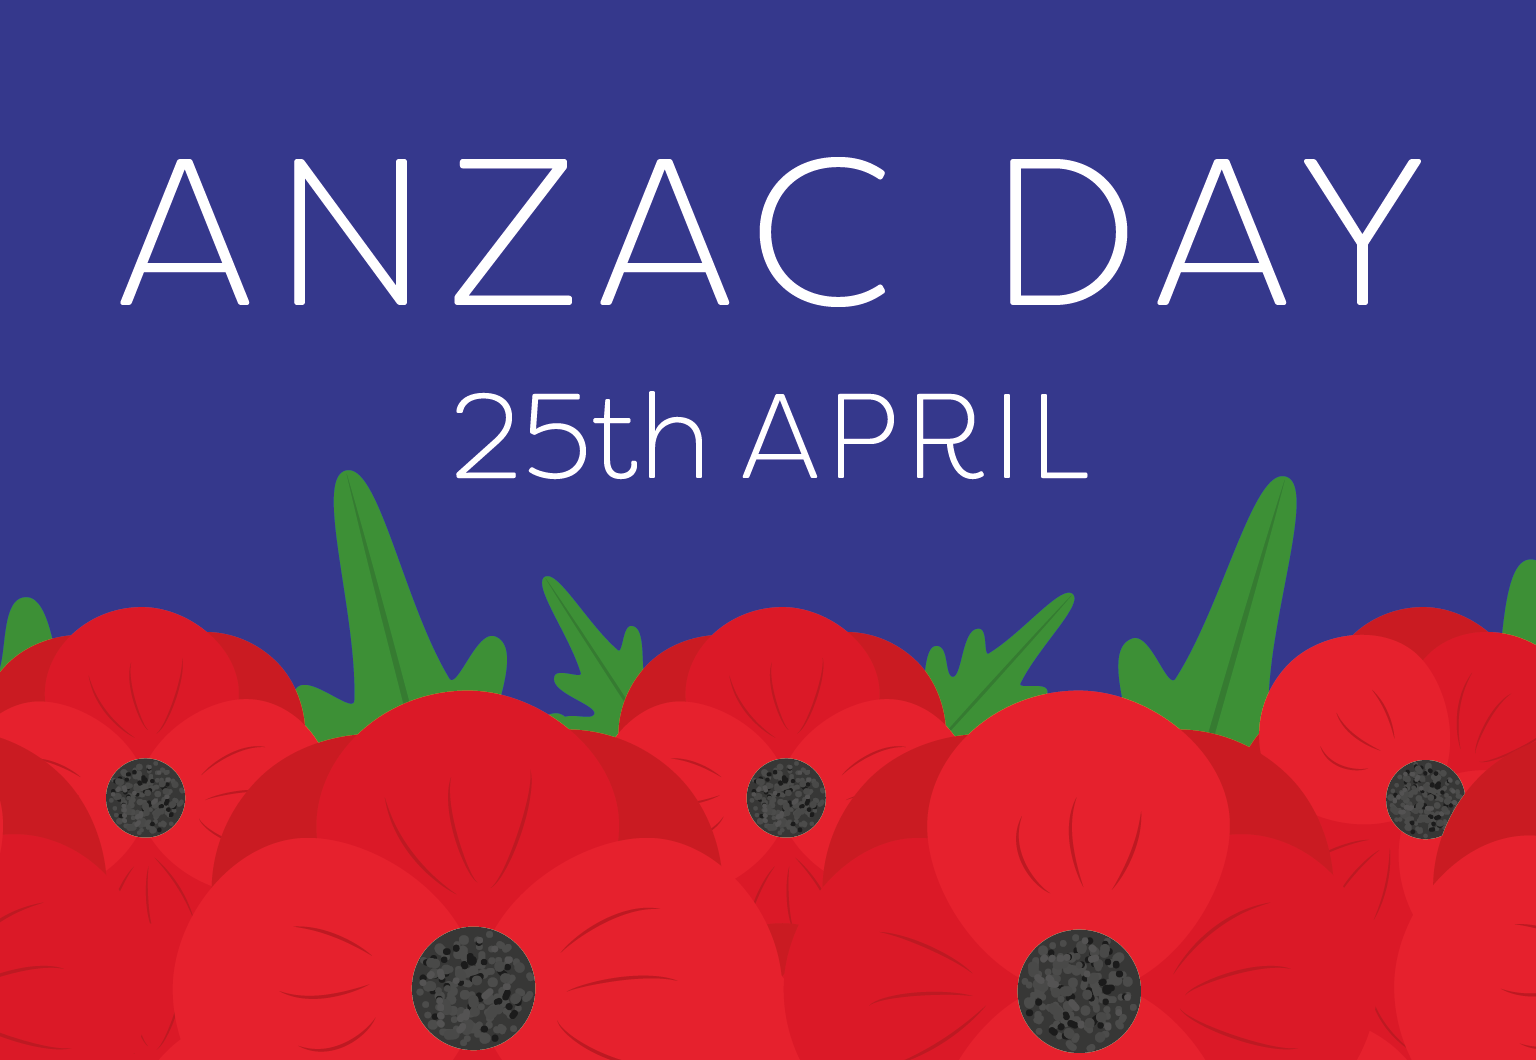 Remembering our heroes this ANZAC Day